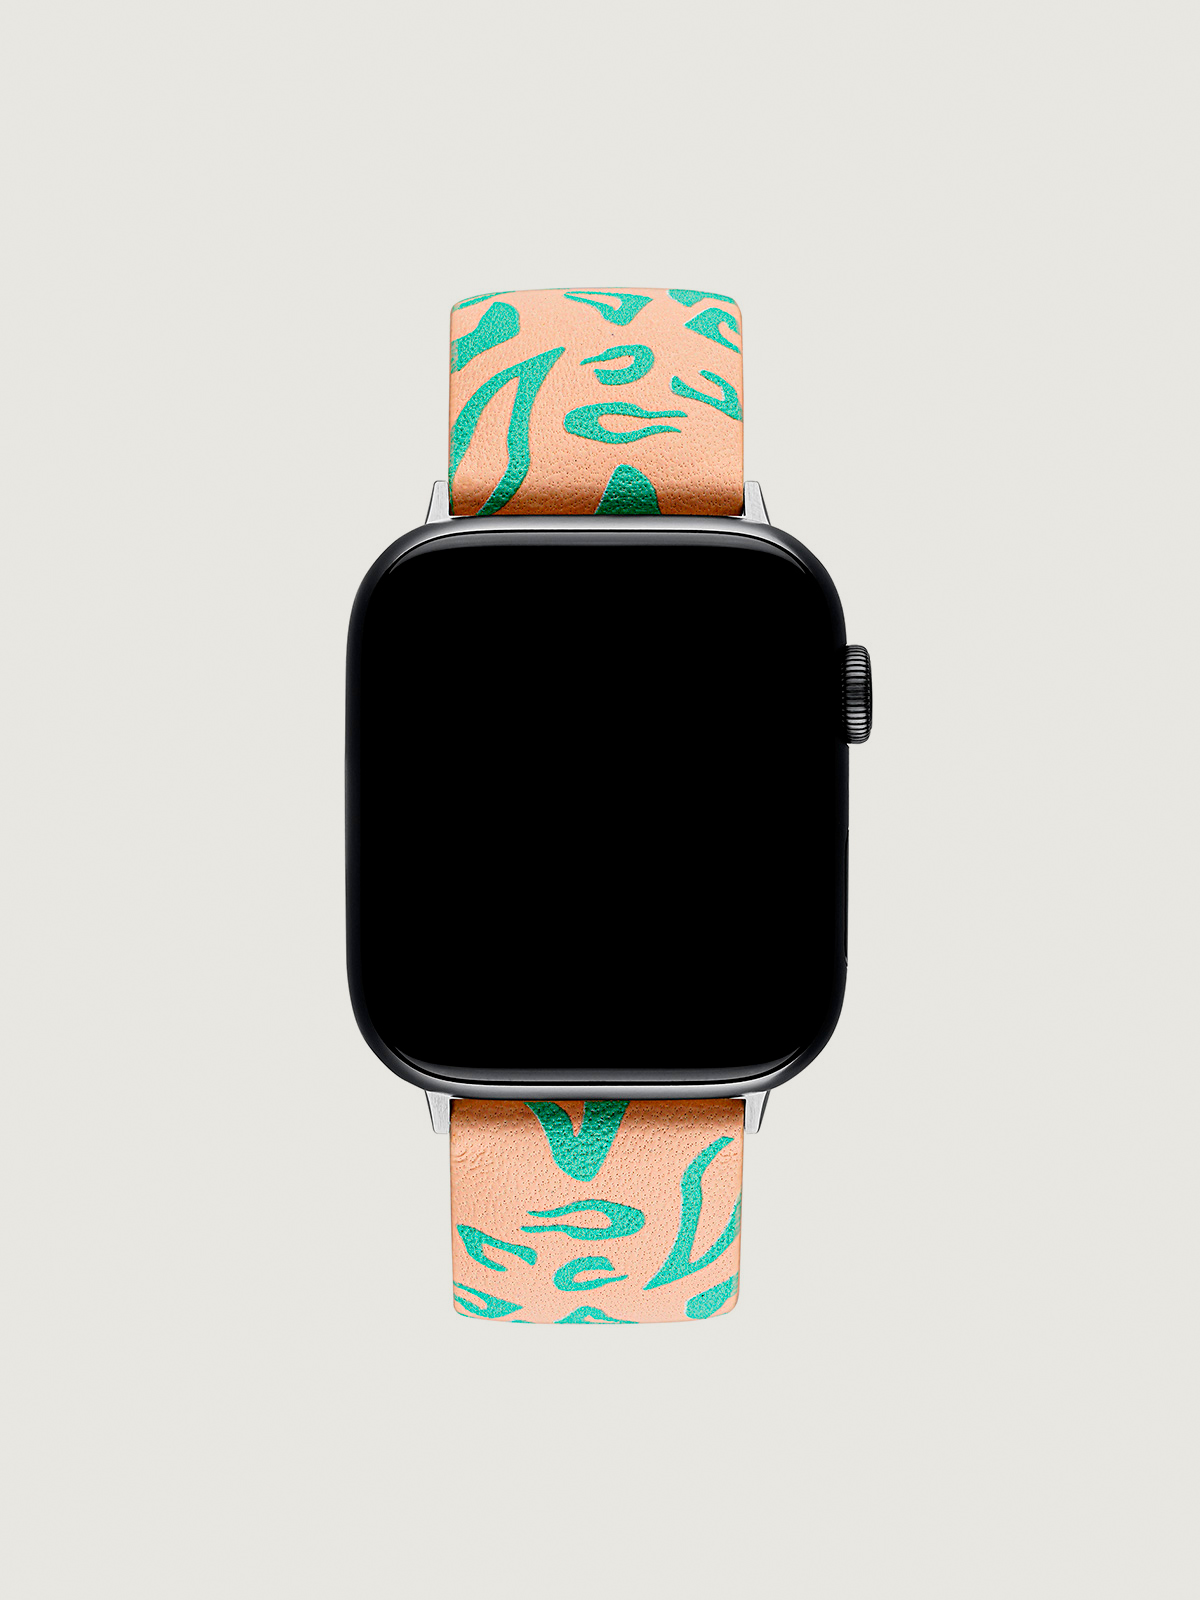 Leather Apple Watch band with pink and green animal print